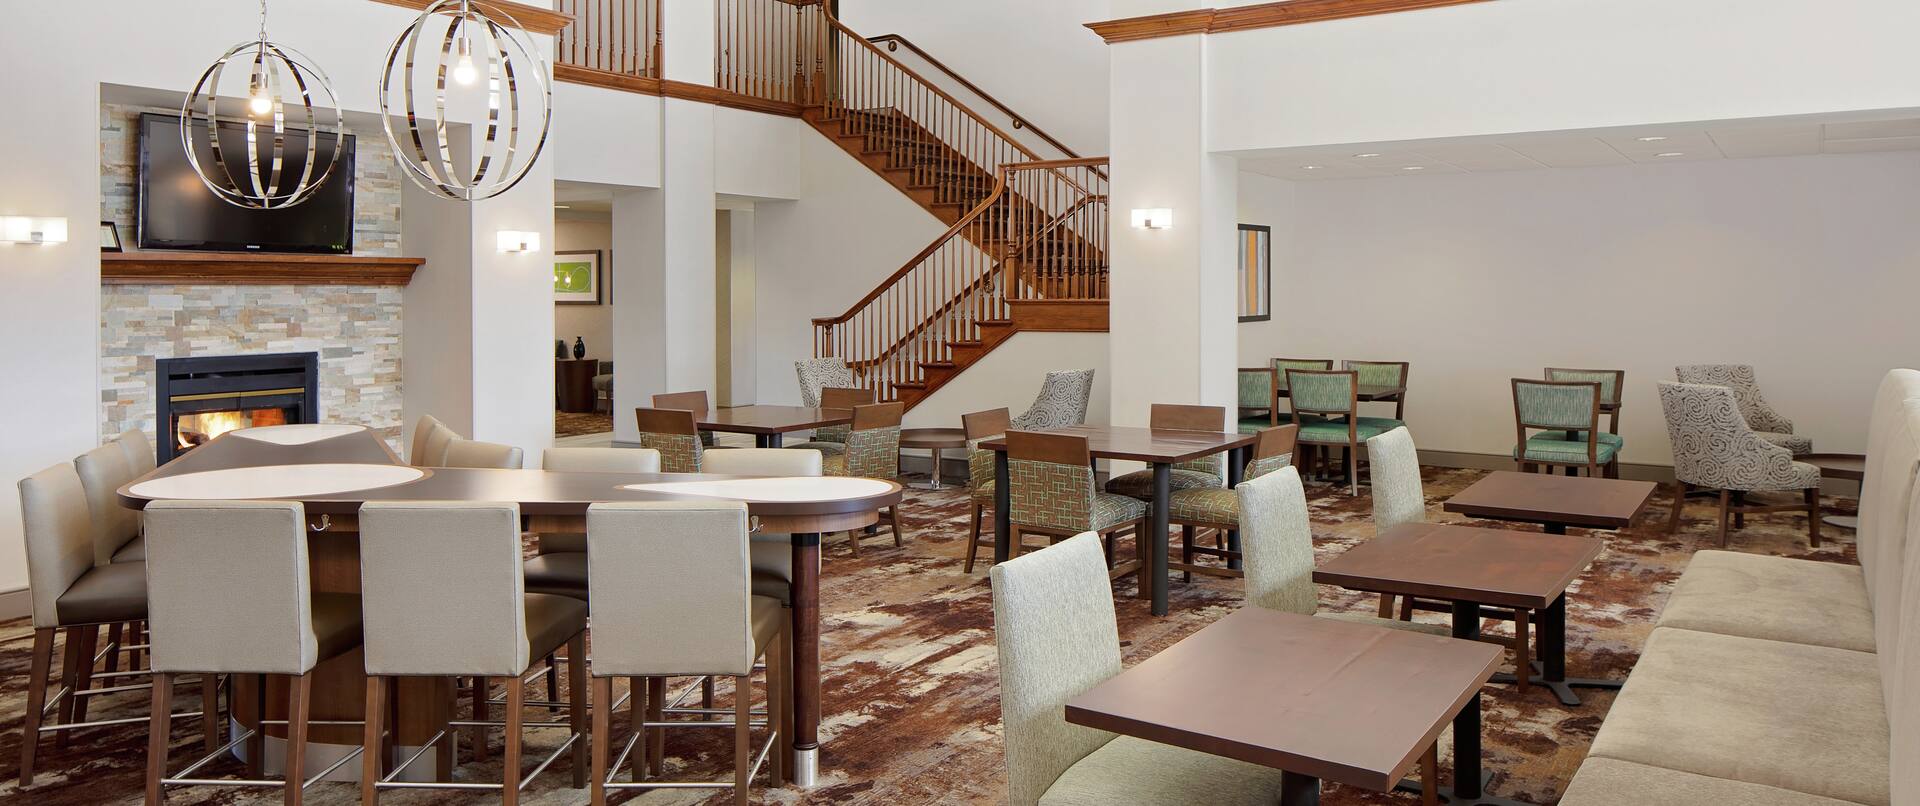 Lobby seating area with tables, chairs and fireplace